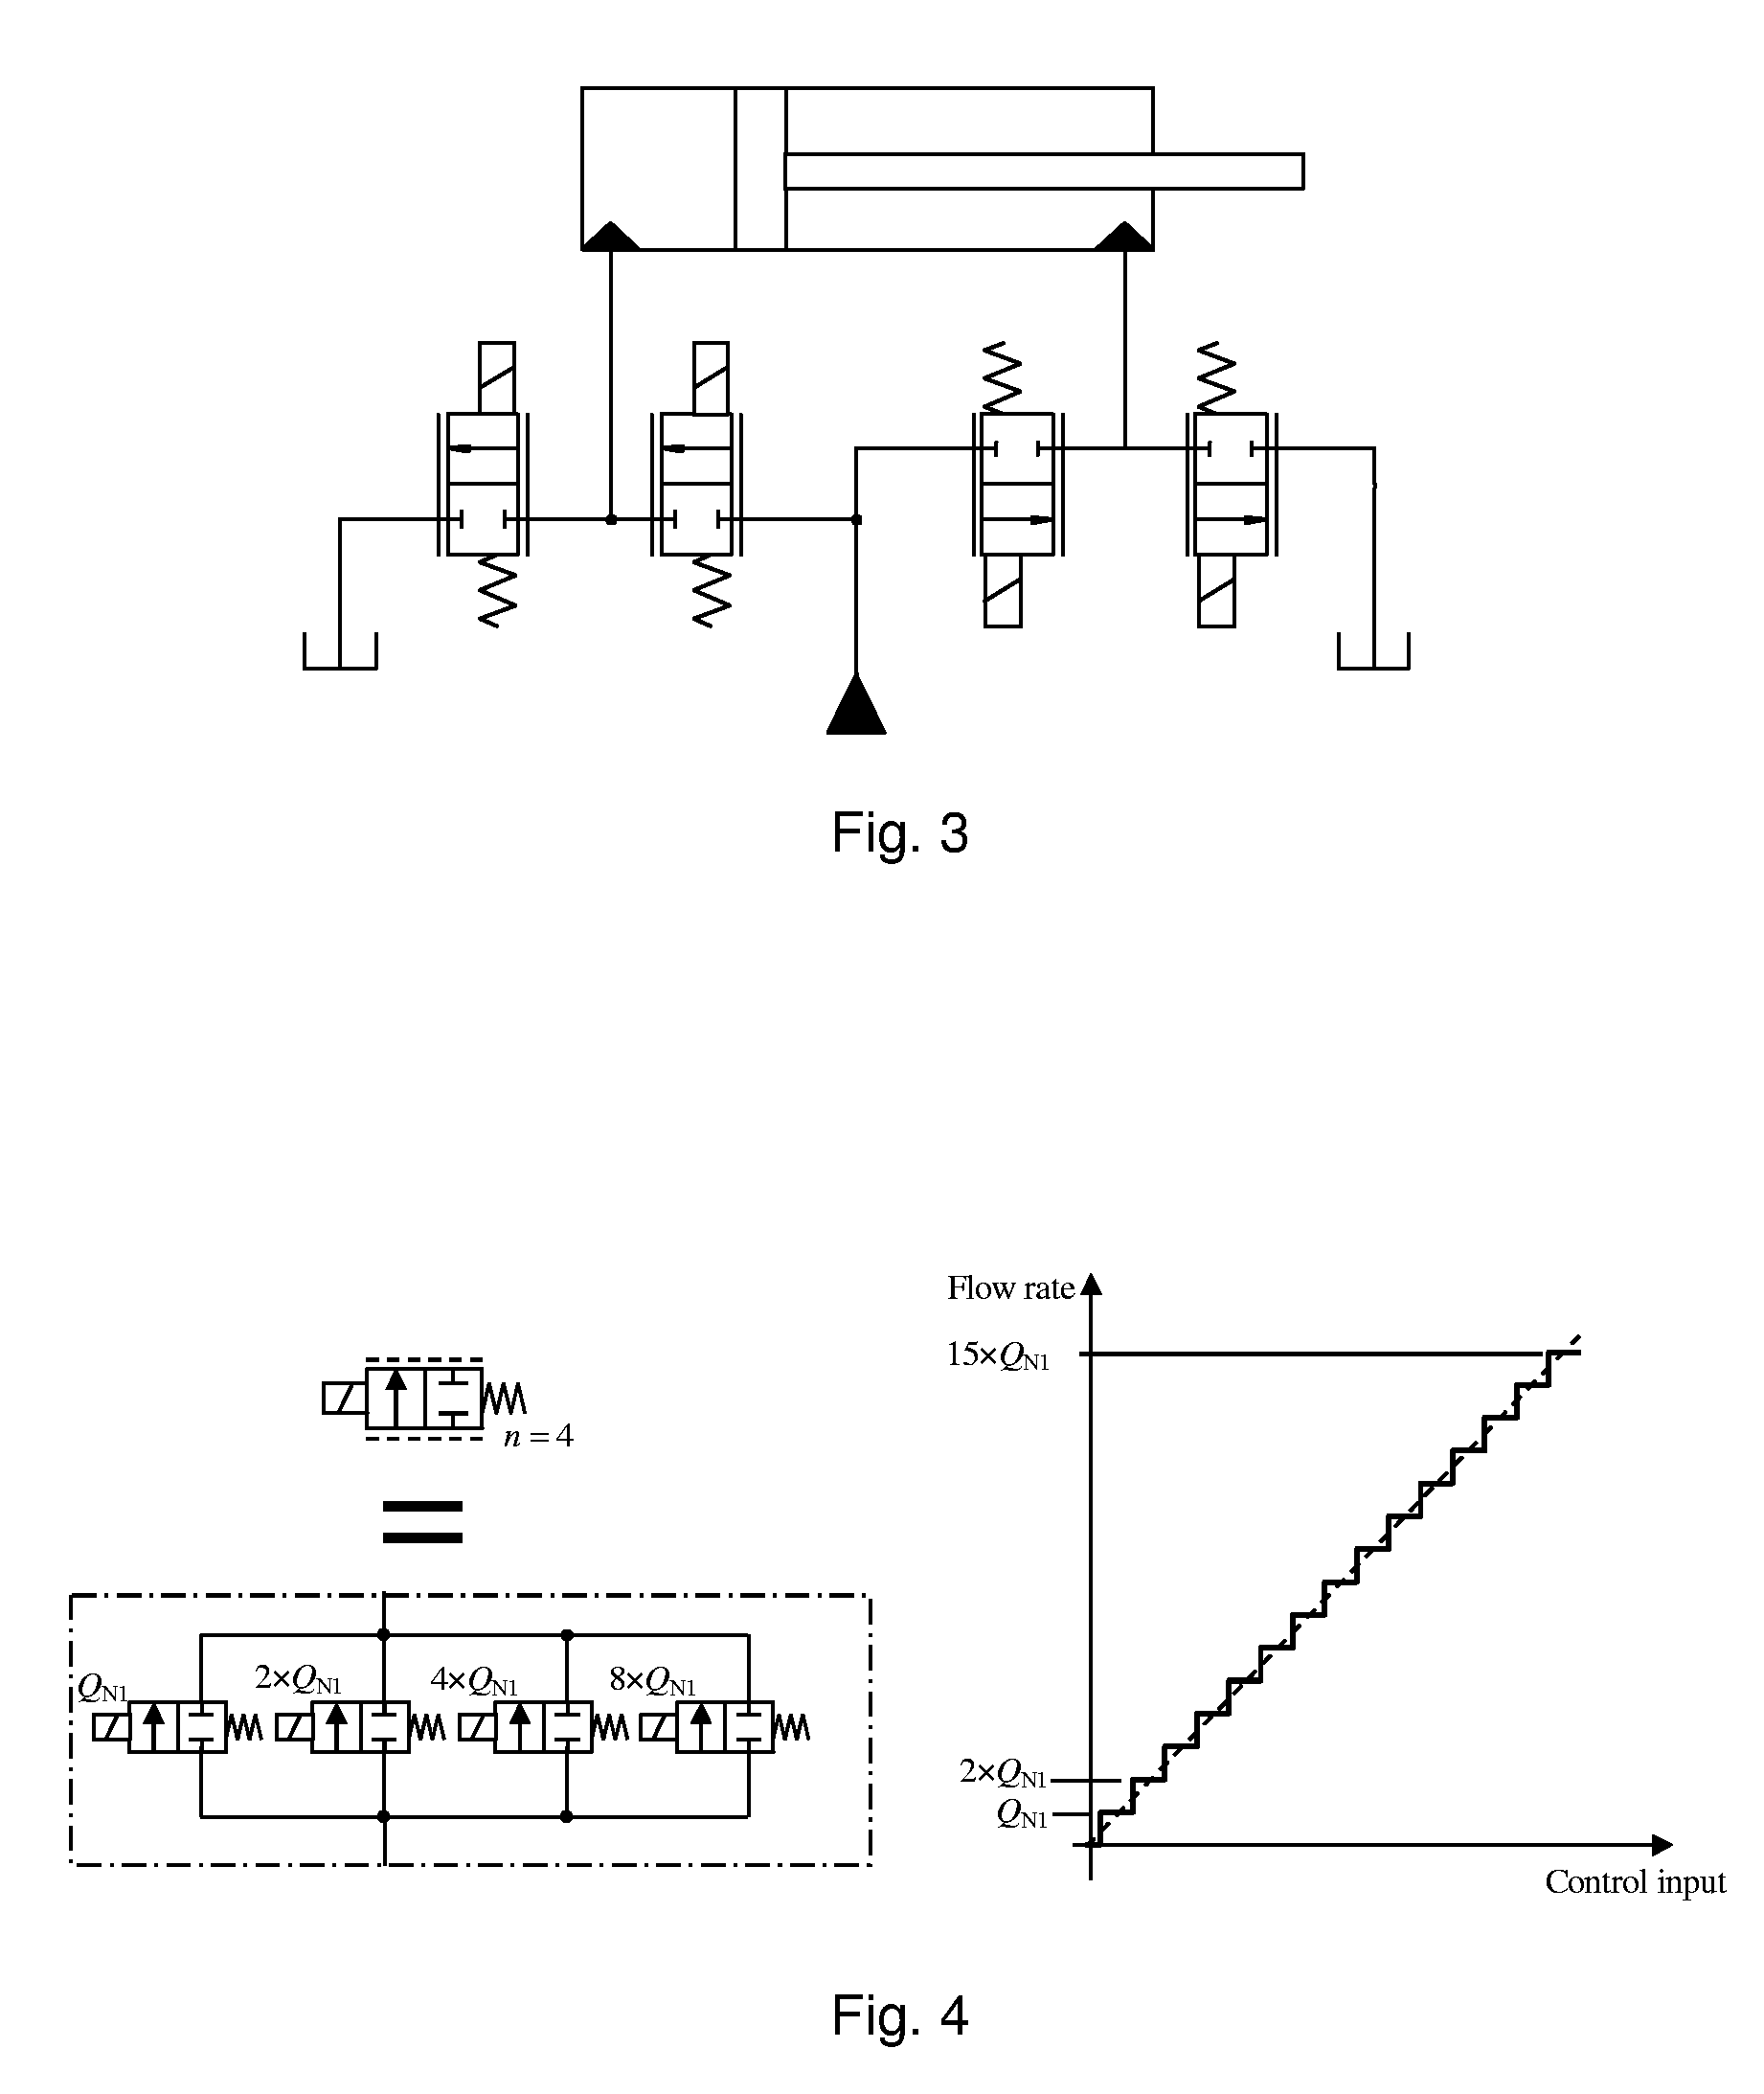 Detecting of faults in a valve system and a fault tolerant control